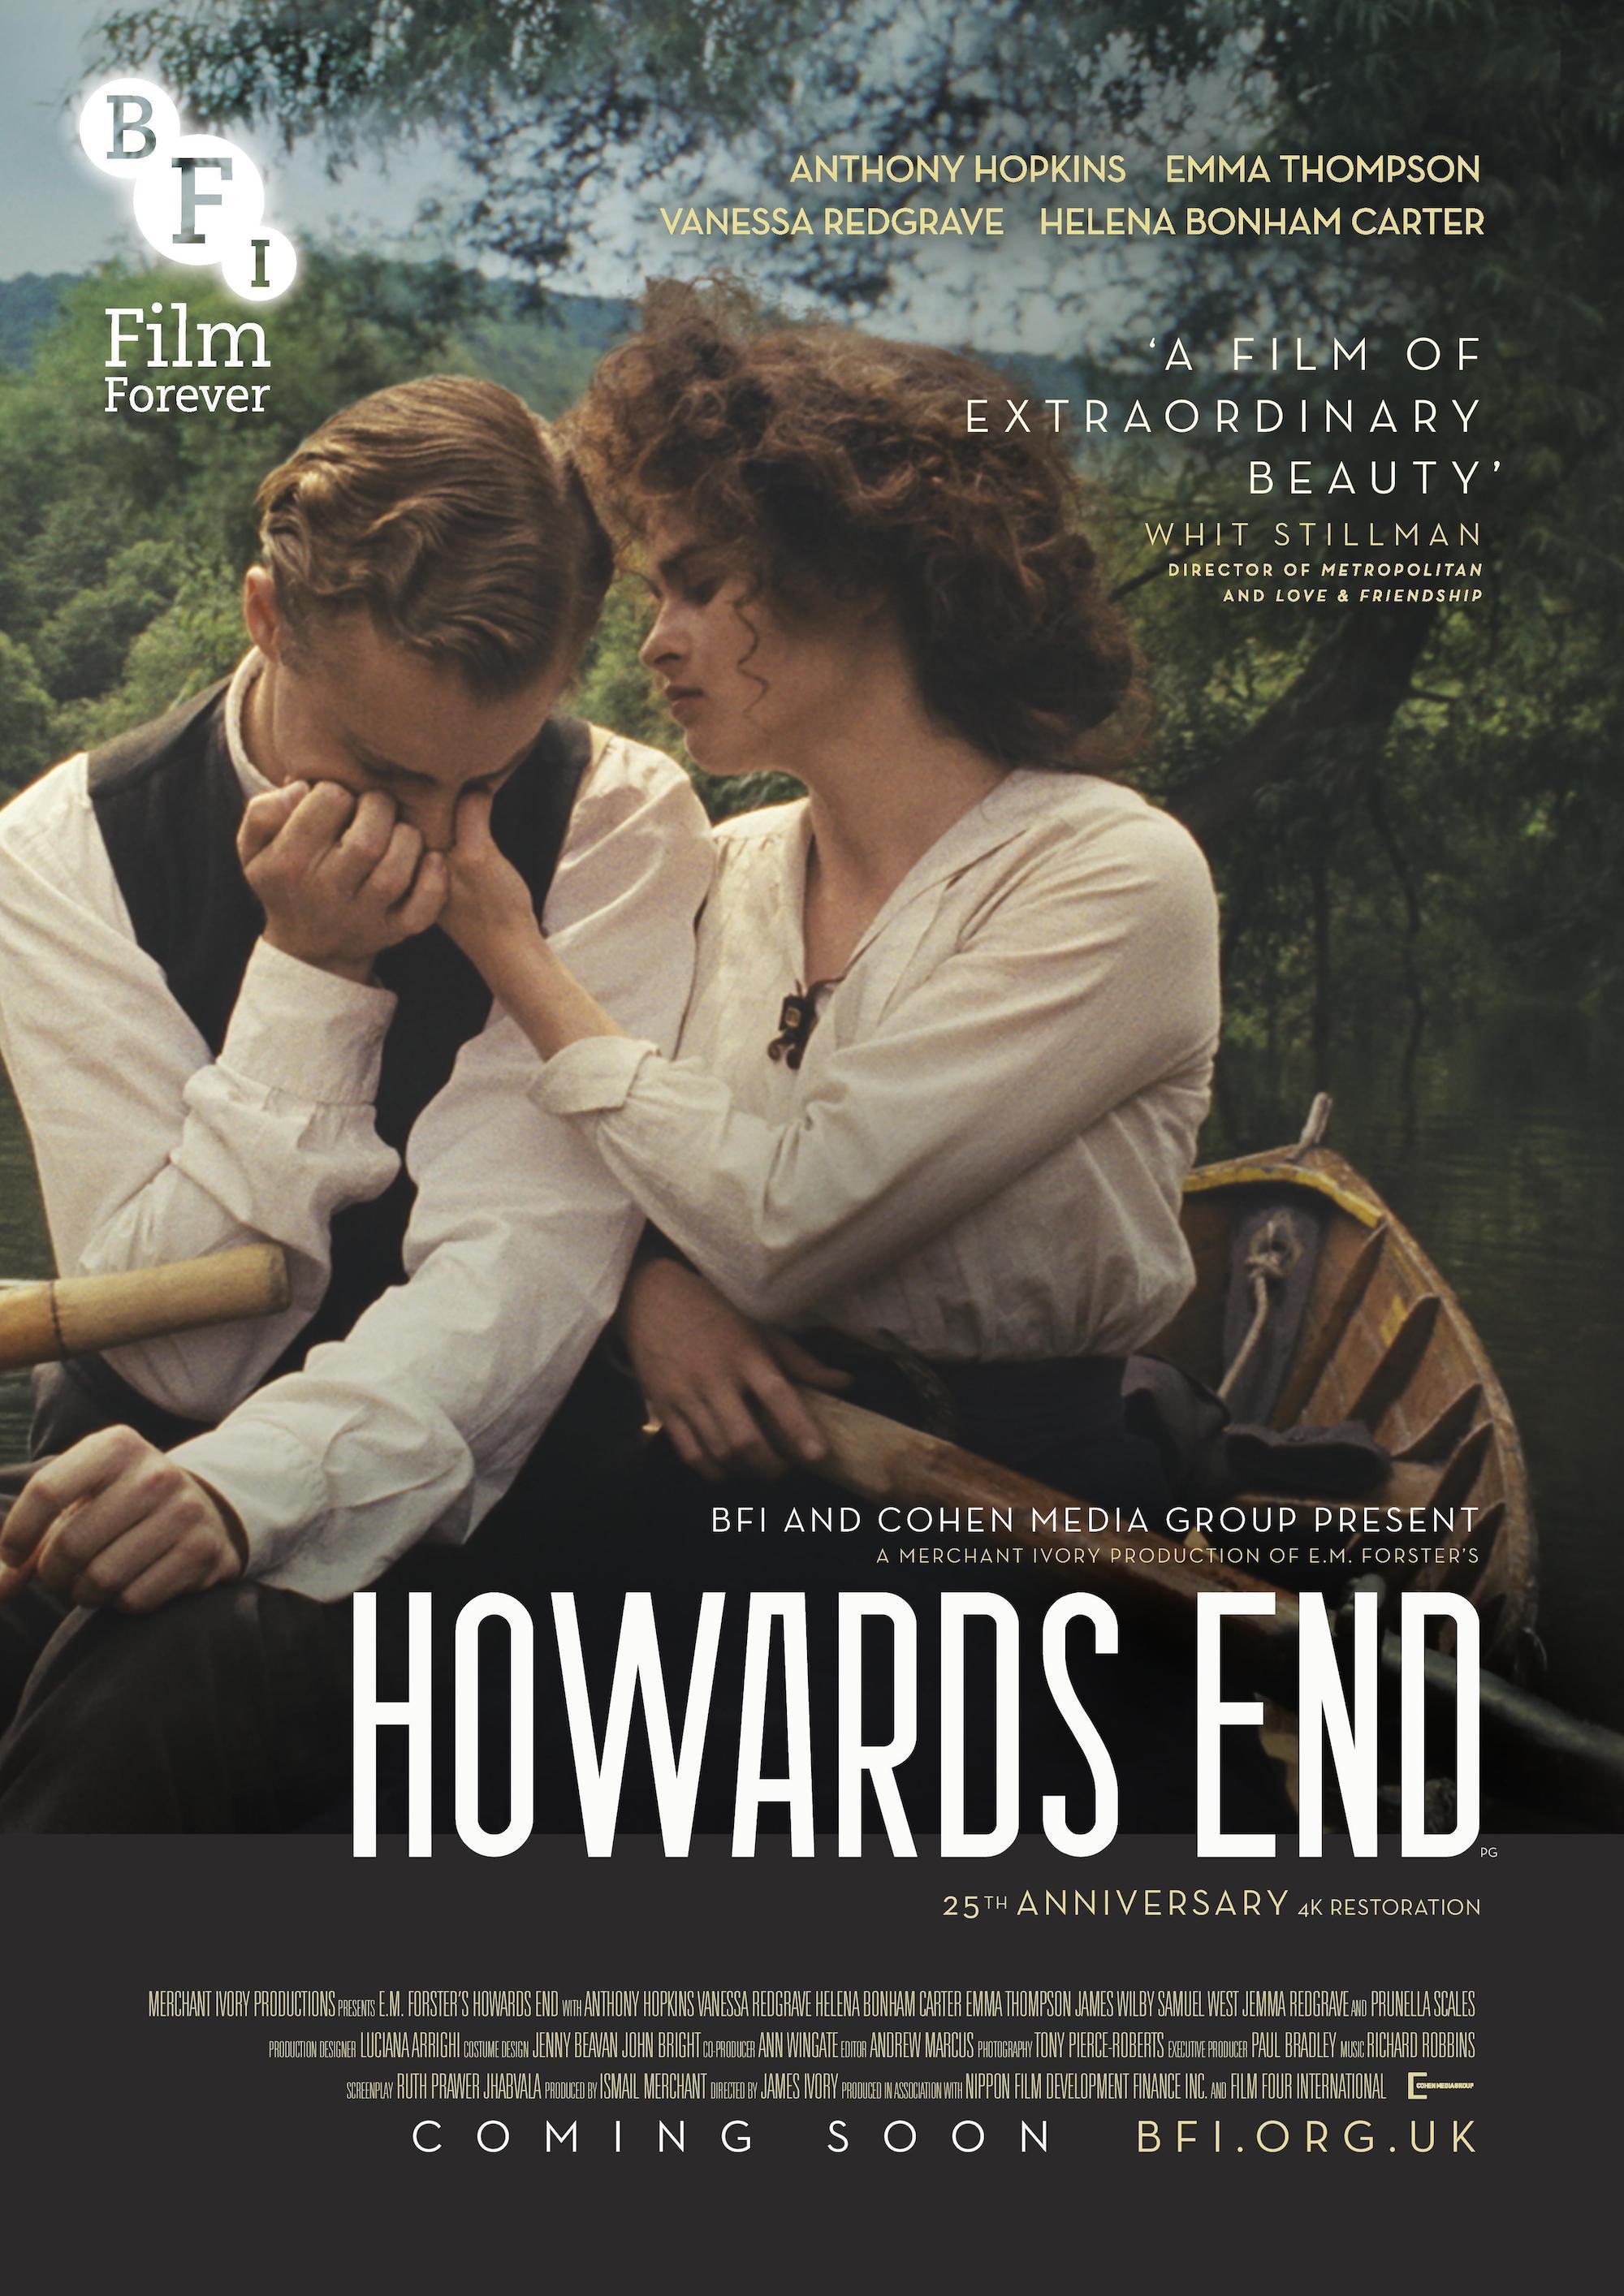 howards end is on the landing